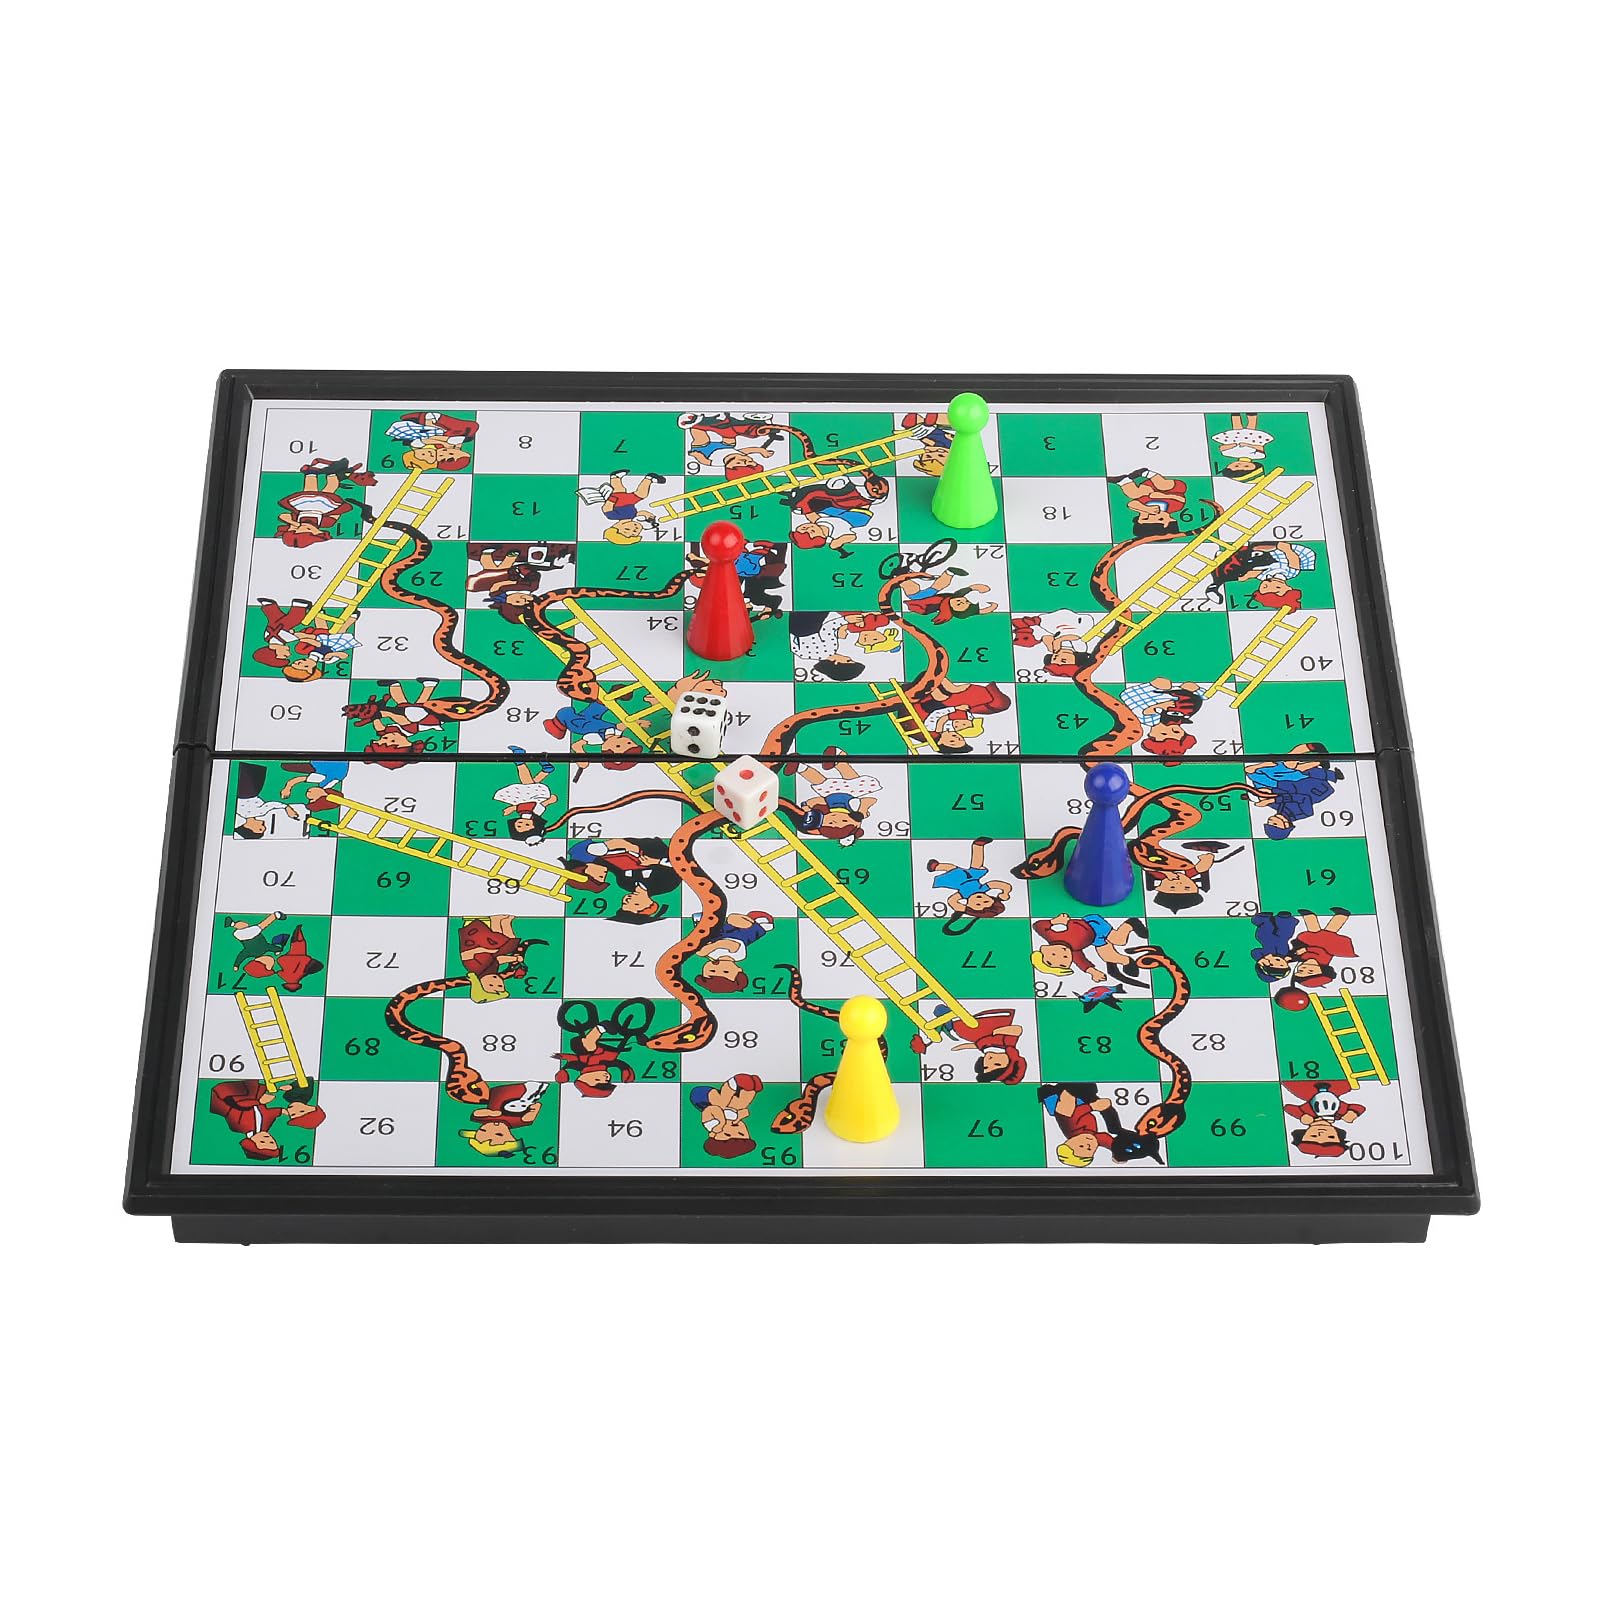 Snakes and Ladders Board Game,Magnetic Folding Travel Board Game, 9.75 Inch Portable Game Set